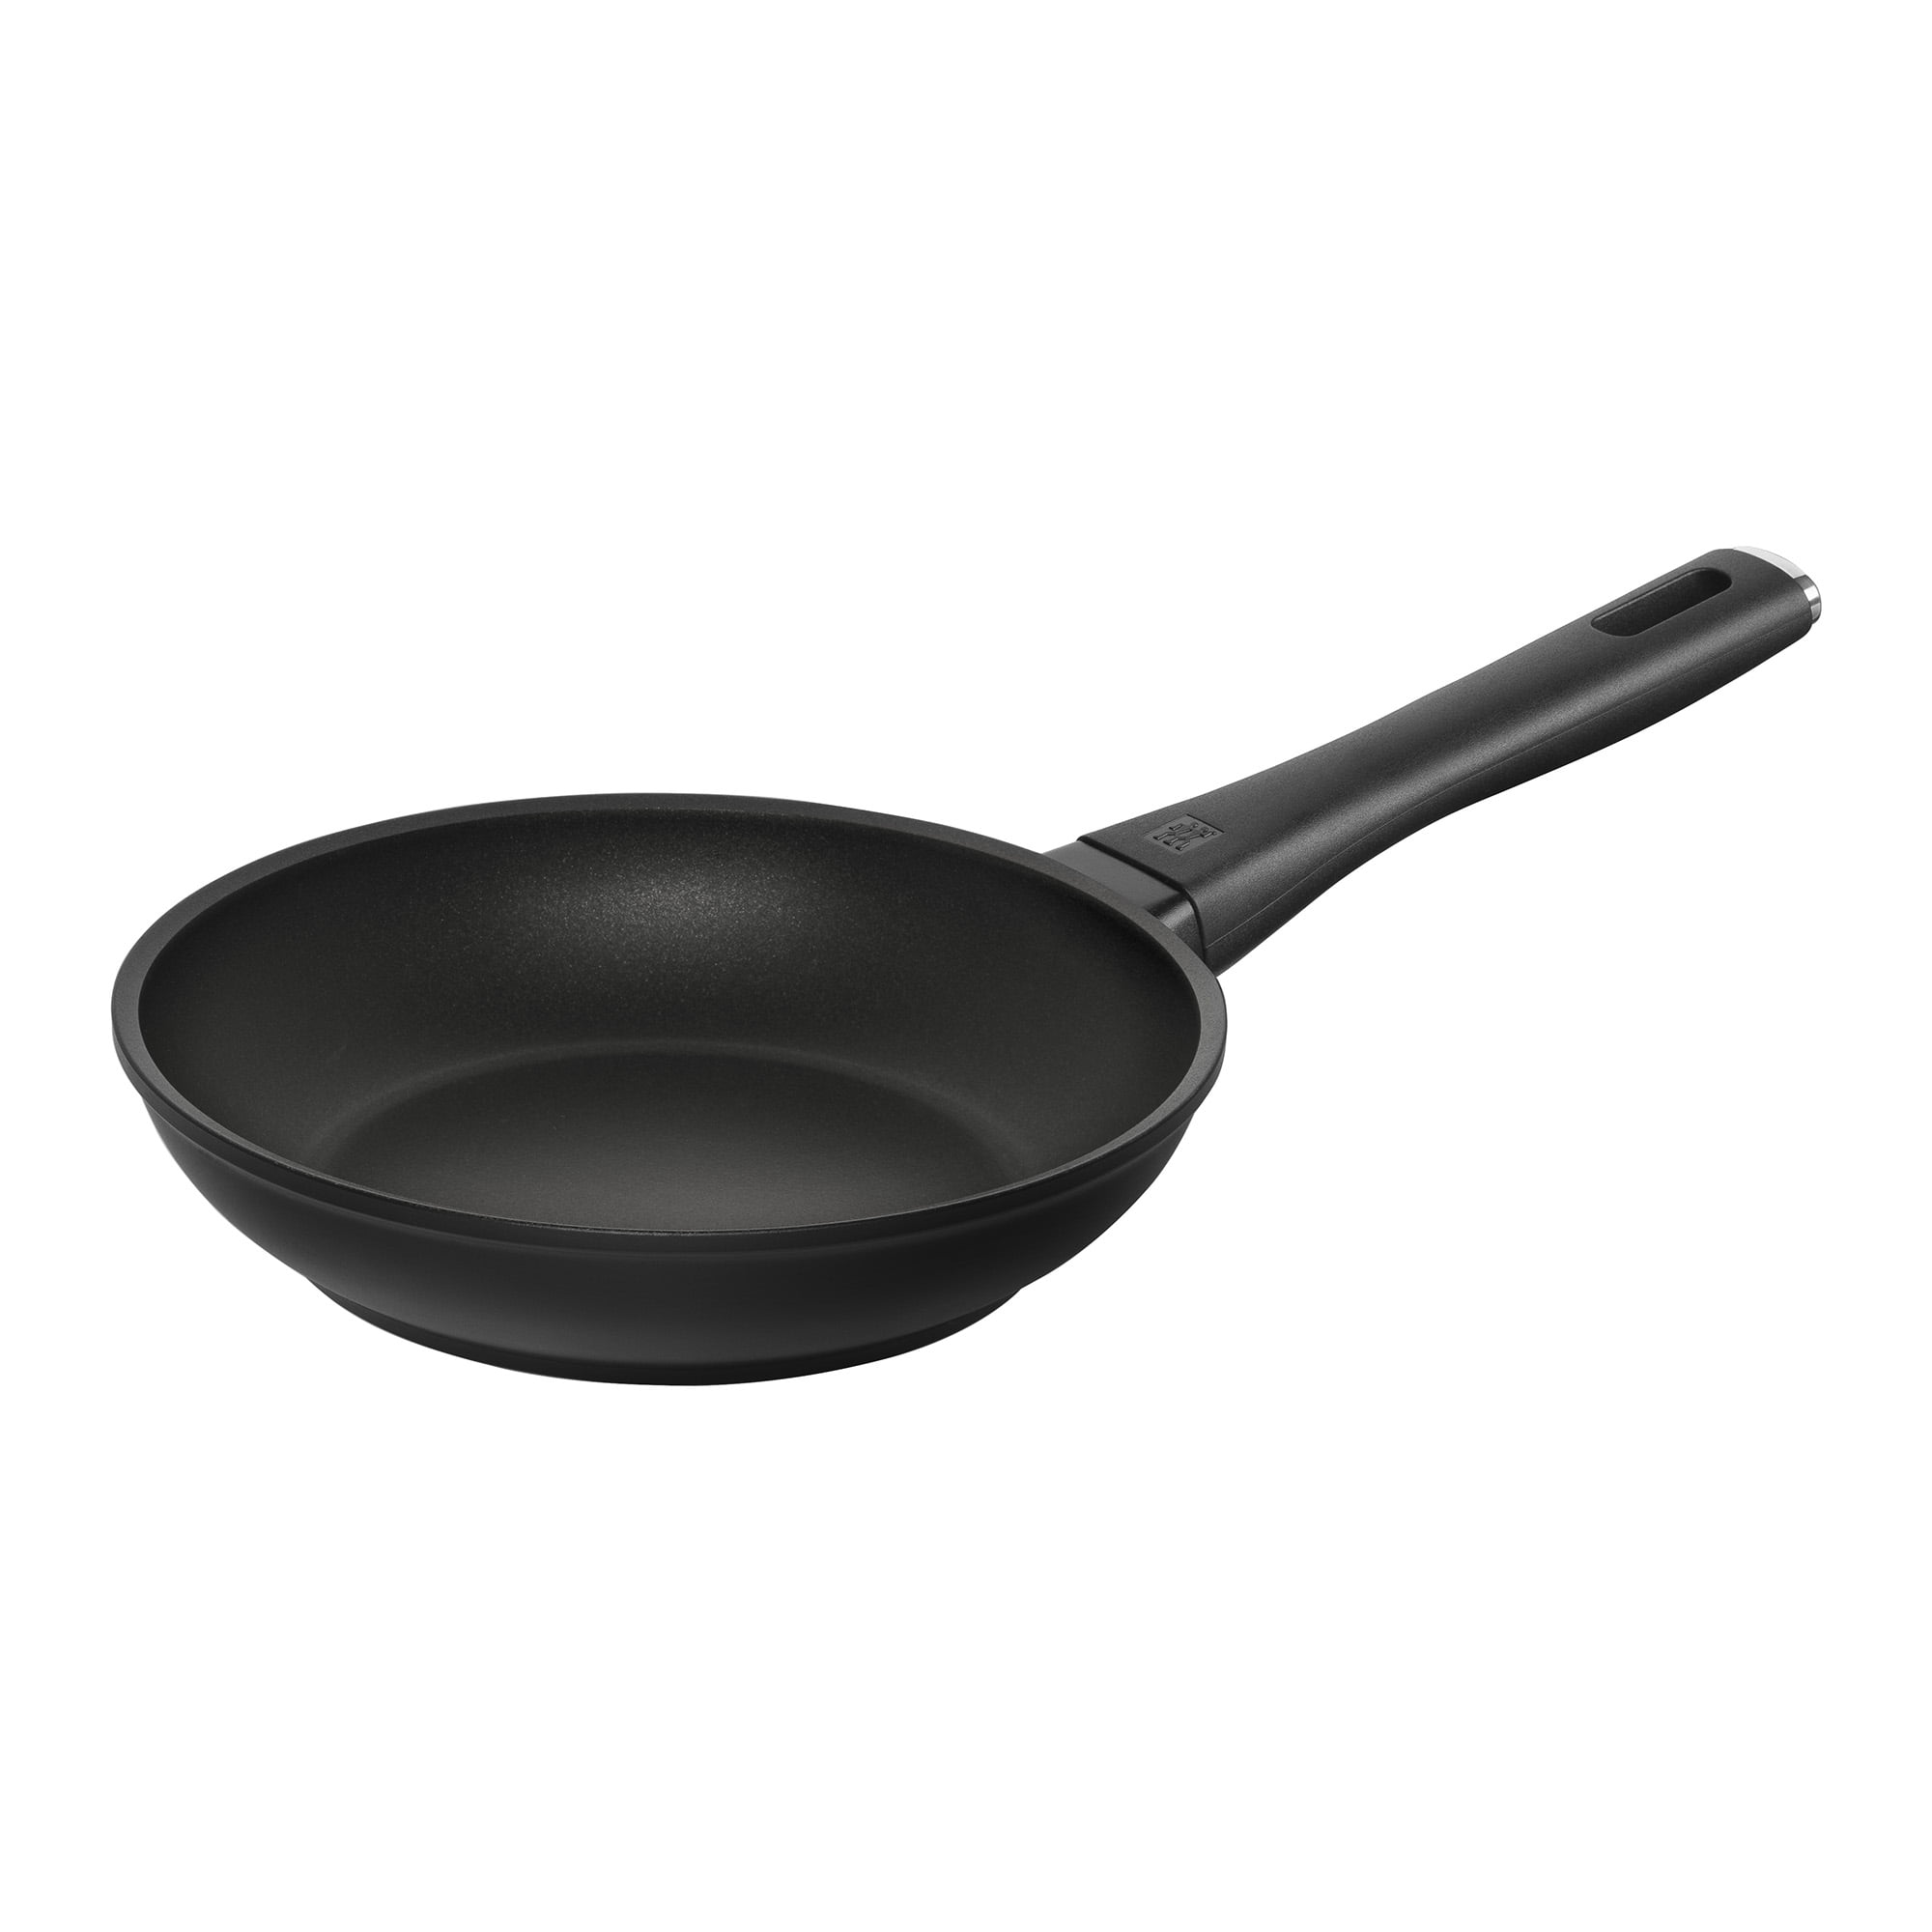 8.5" Details about   Advanced Hard Anodized Nonstick Frying Pan/ Fry Pan/Hard Anodized Skillet 